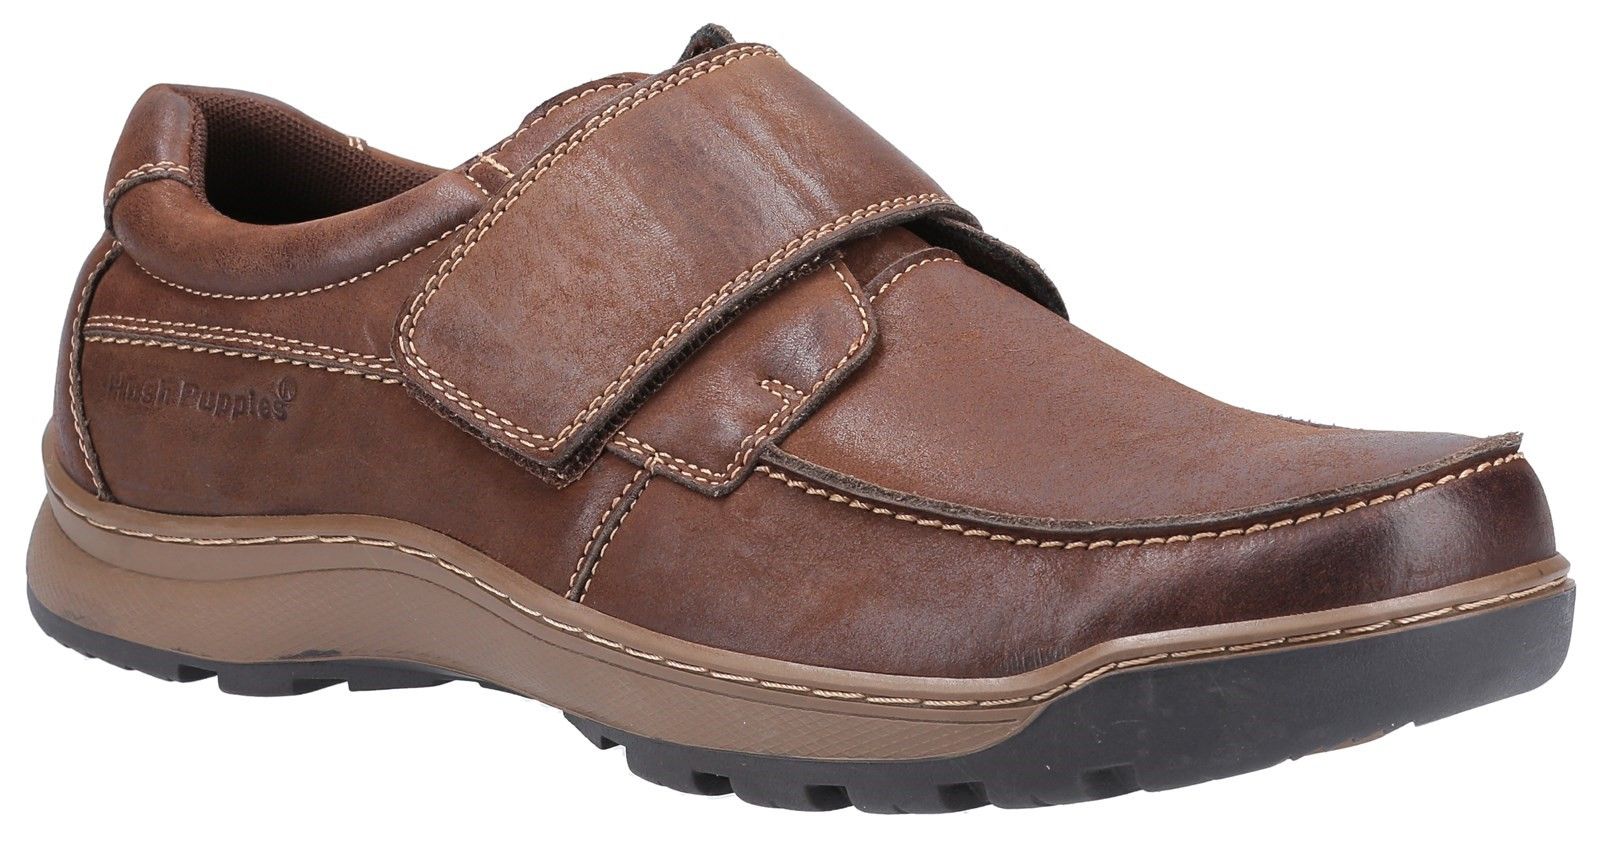 Men's classic touch fastening shoe Casper; perfect for relaxed day-to-day styling with comfortable leather uppers, padded collar, memory footbed and flexible sole for all day comfort.Leather upper. 
Easy velcro fastening. 
Padded collar for added comfort. 
Breathable textile lining. 
Memory foam comfort insole.